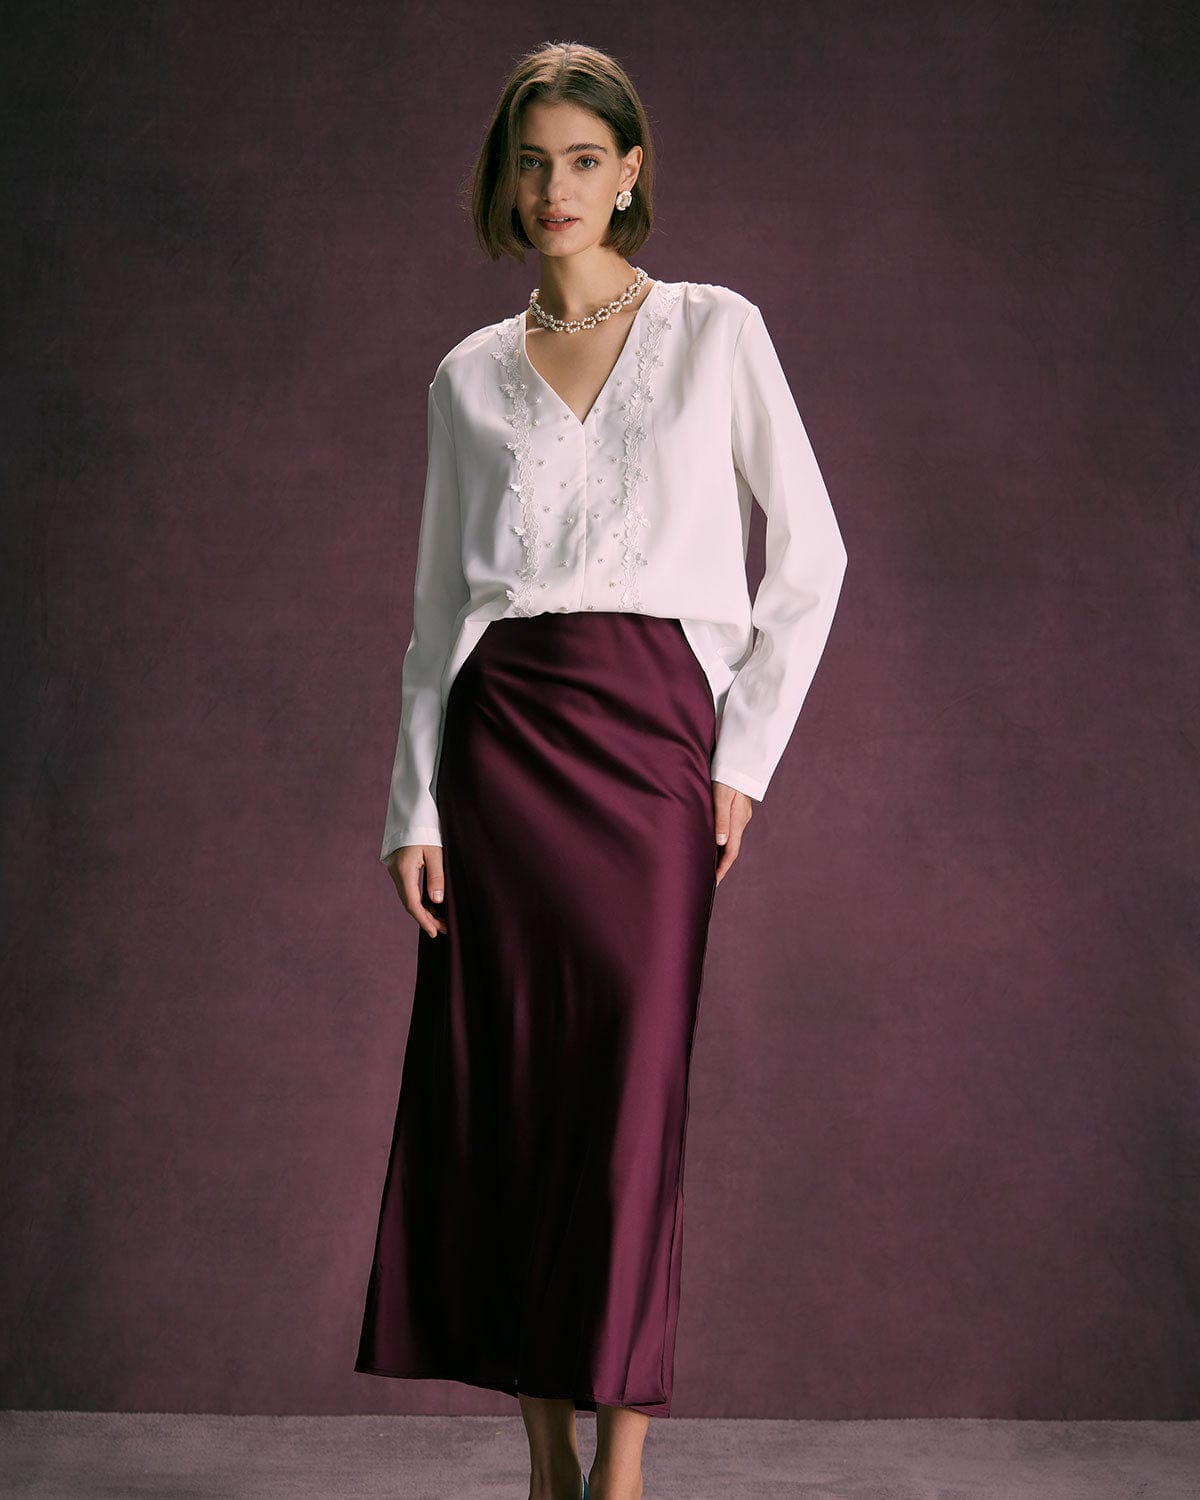 Satin Pleat Skirt In Burgundy by Albaray – Percy Langley